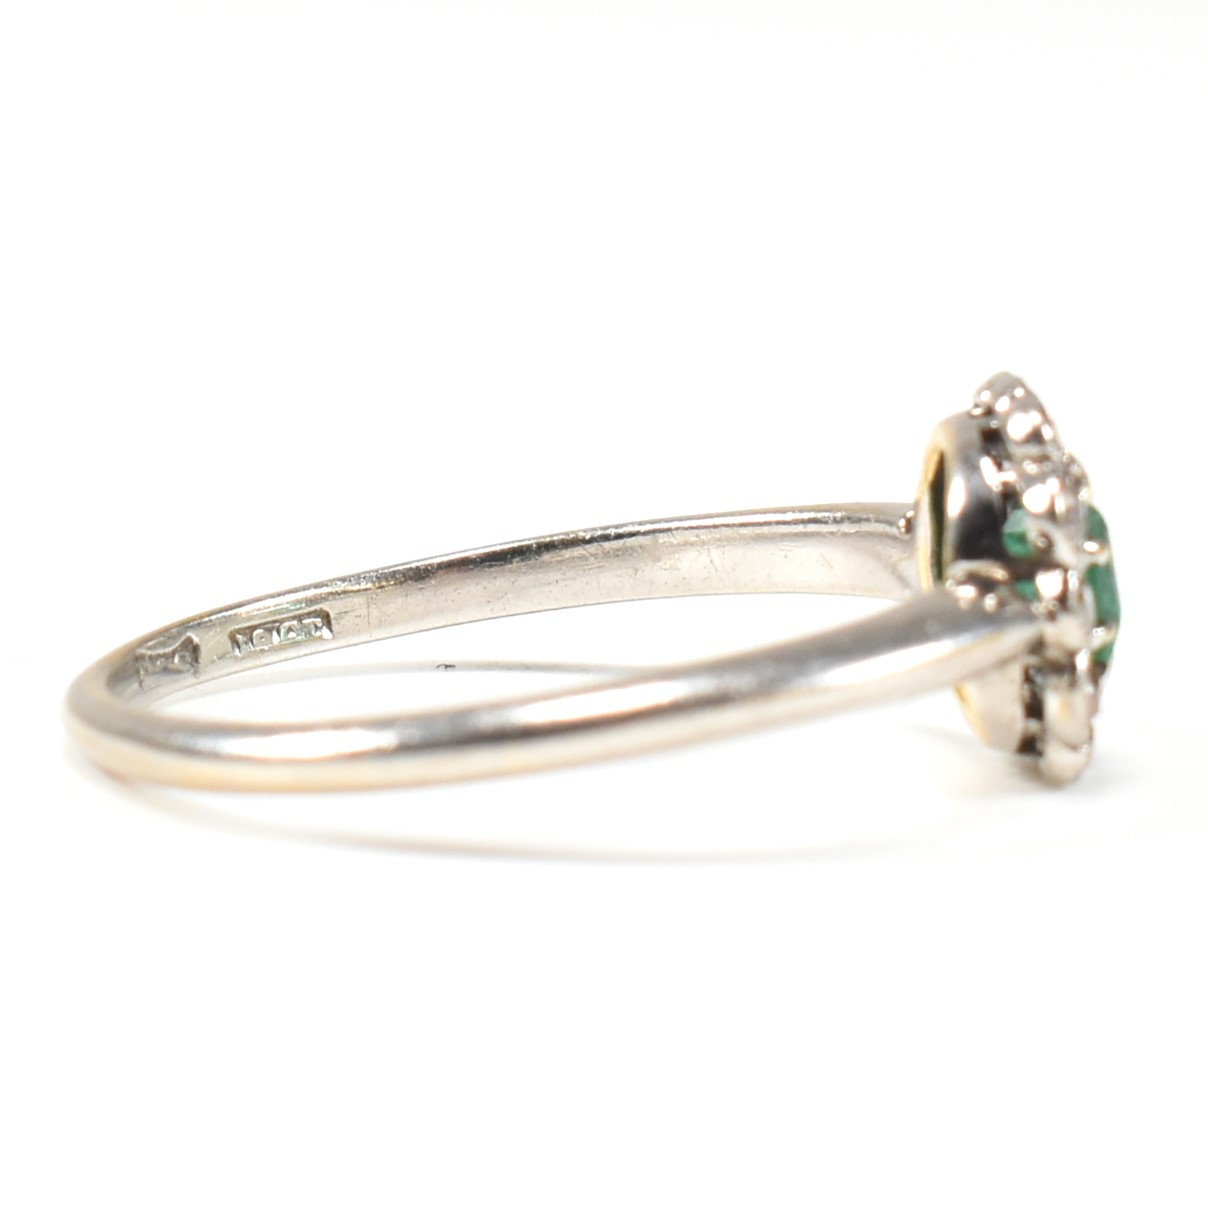 1920S 18CT WHITE GOLD EMERALD & DIAMOND CLUSTER RING - Image 5 of 9